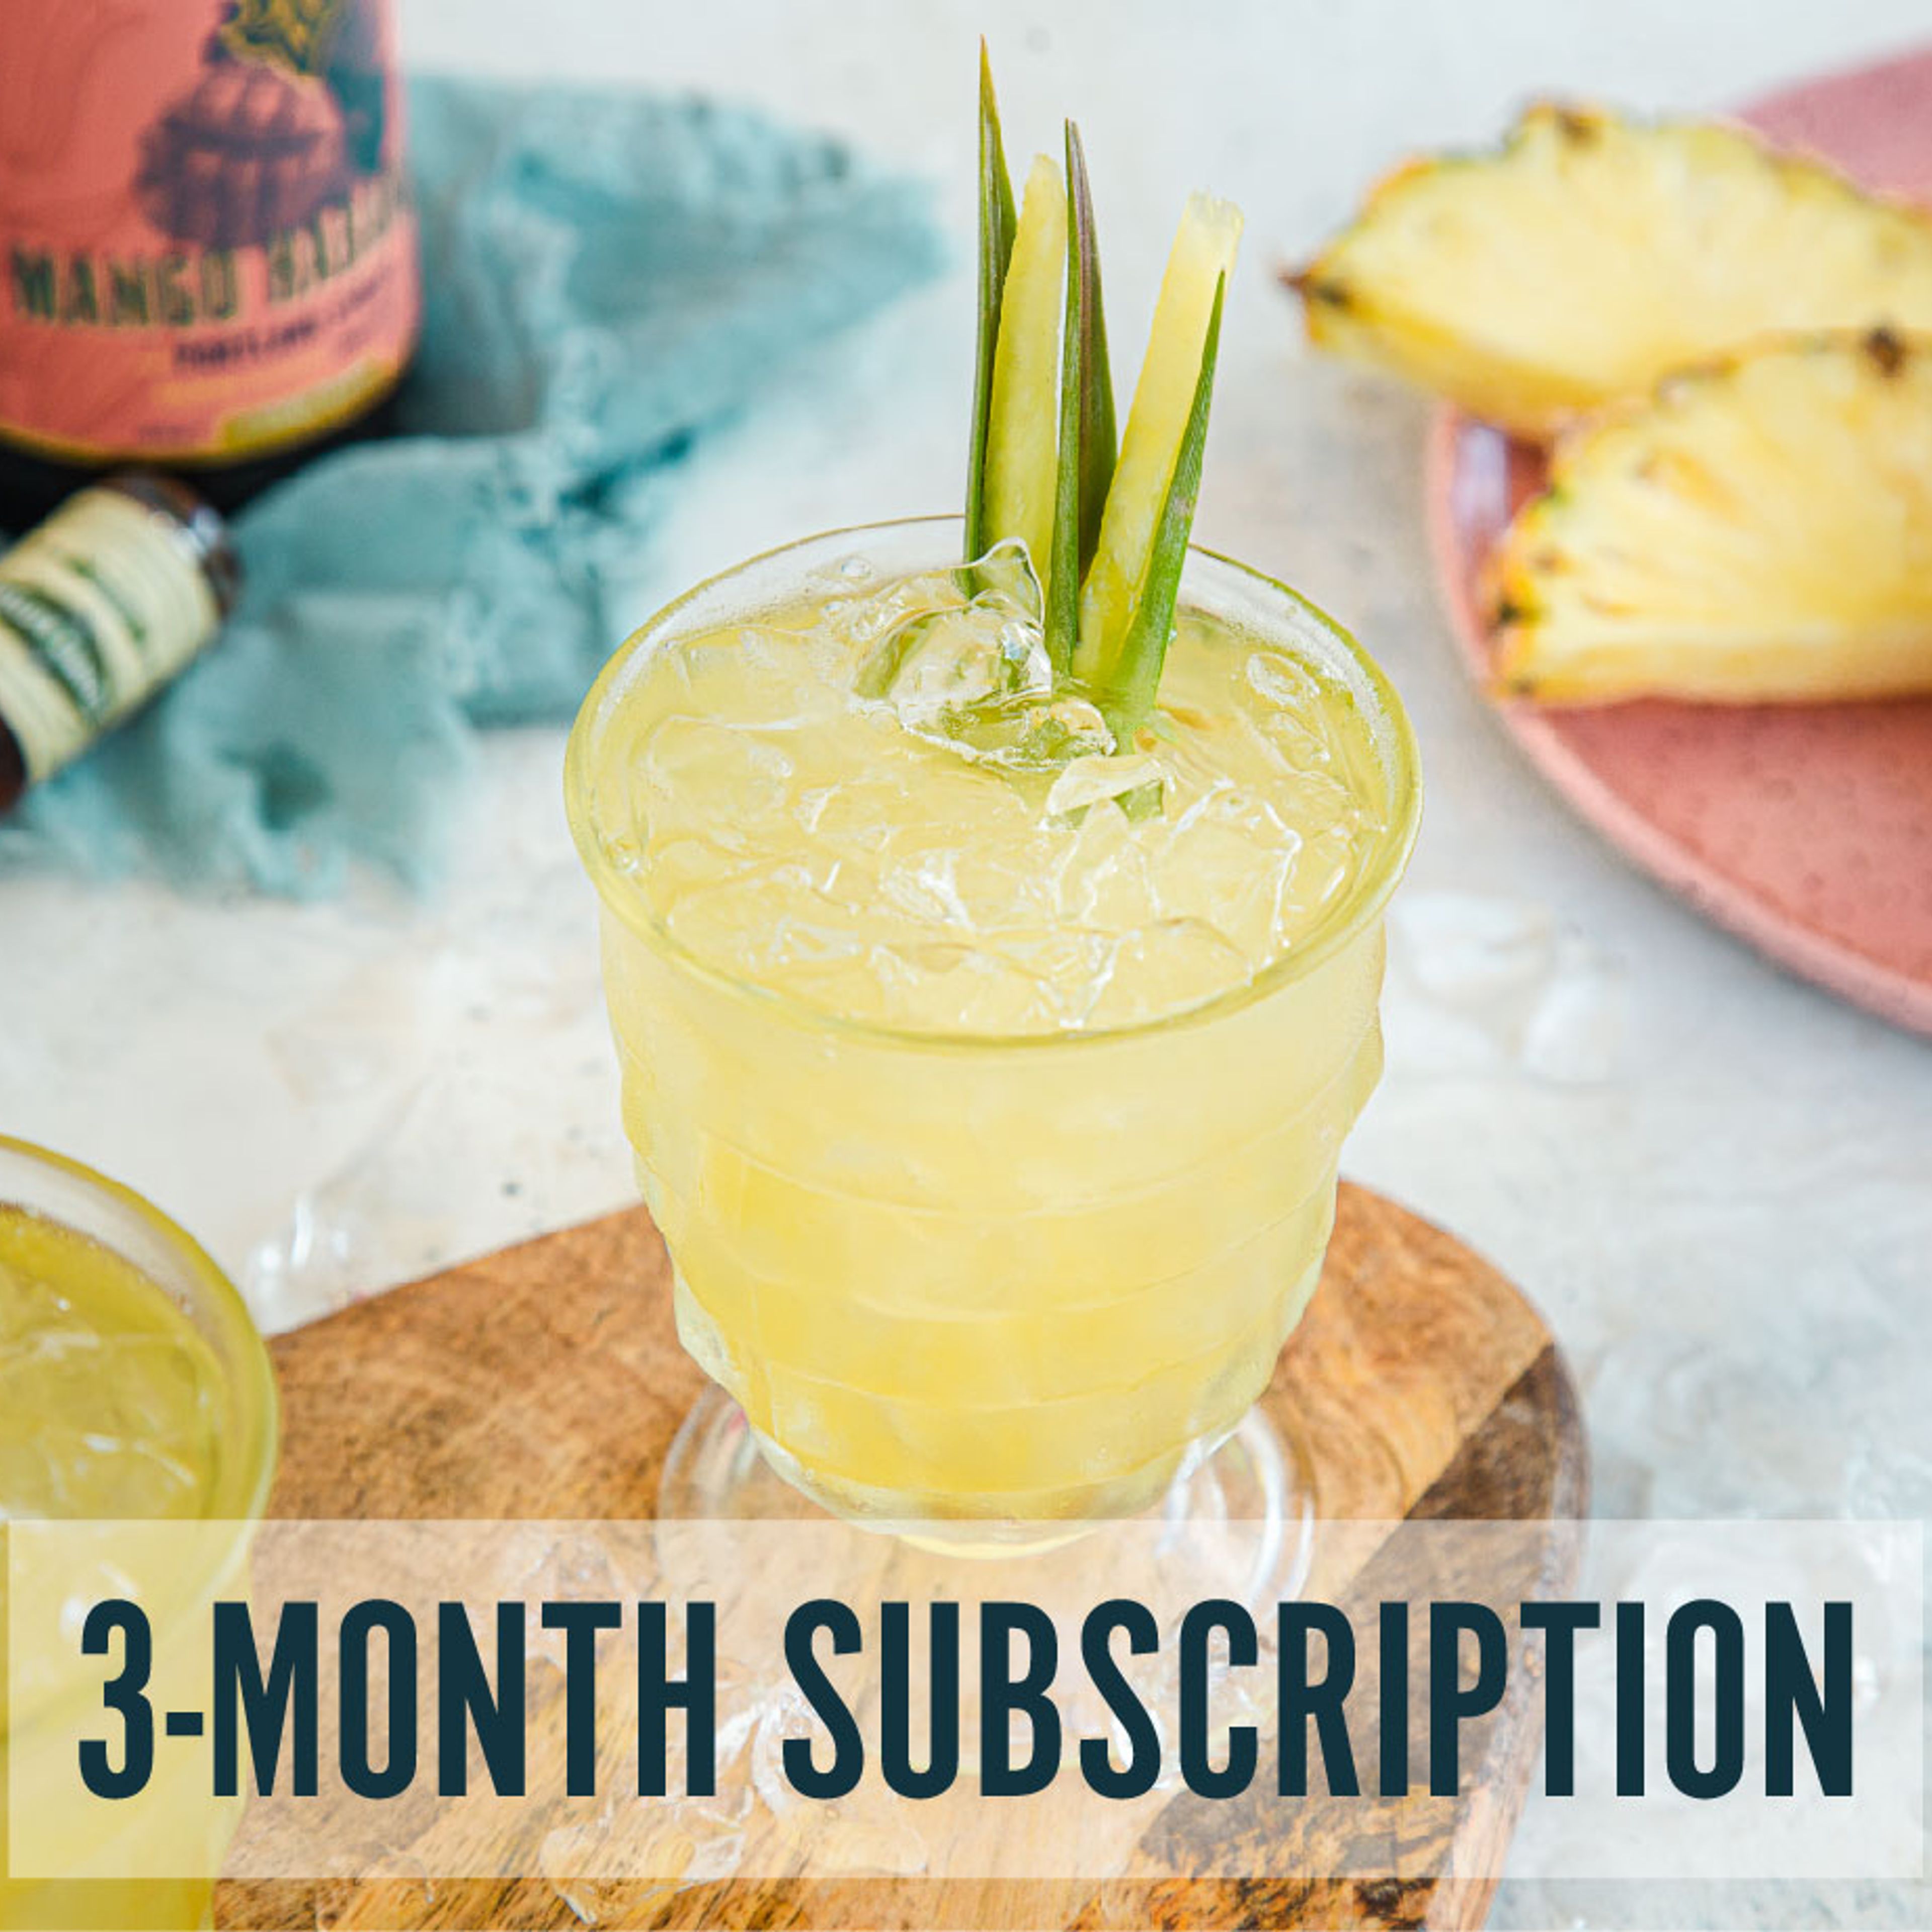 3-month Subscription